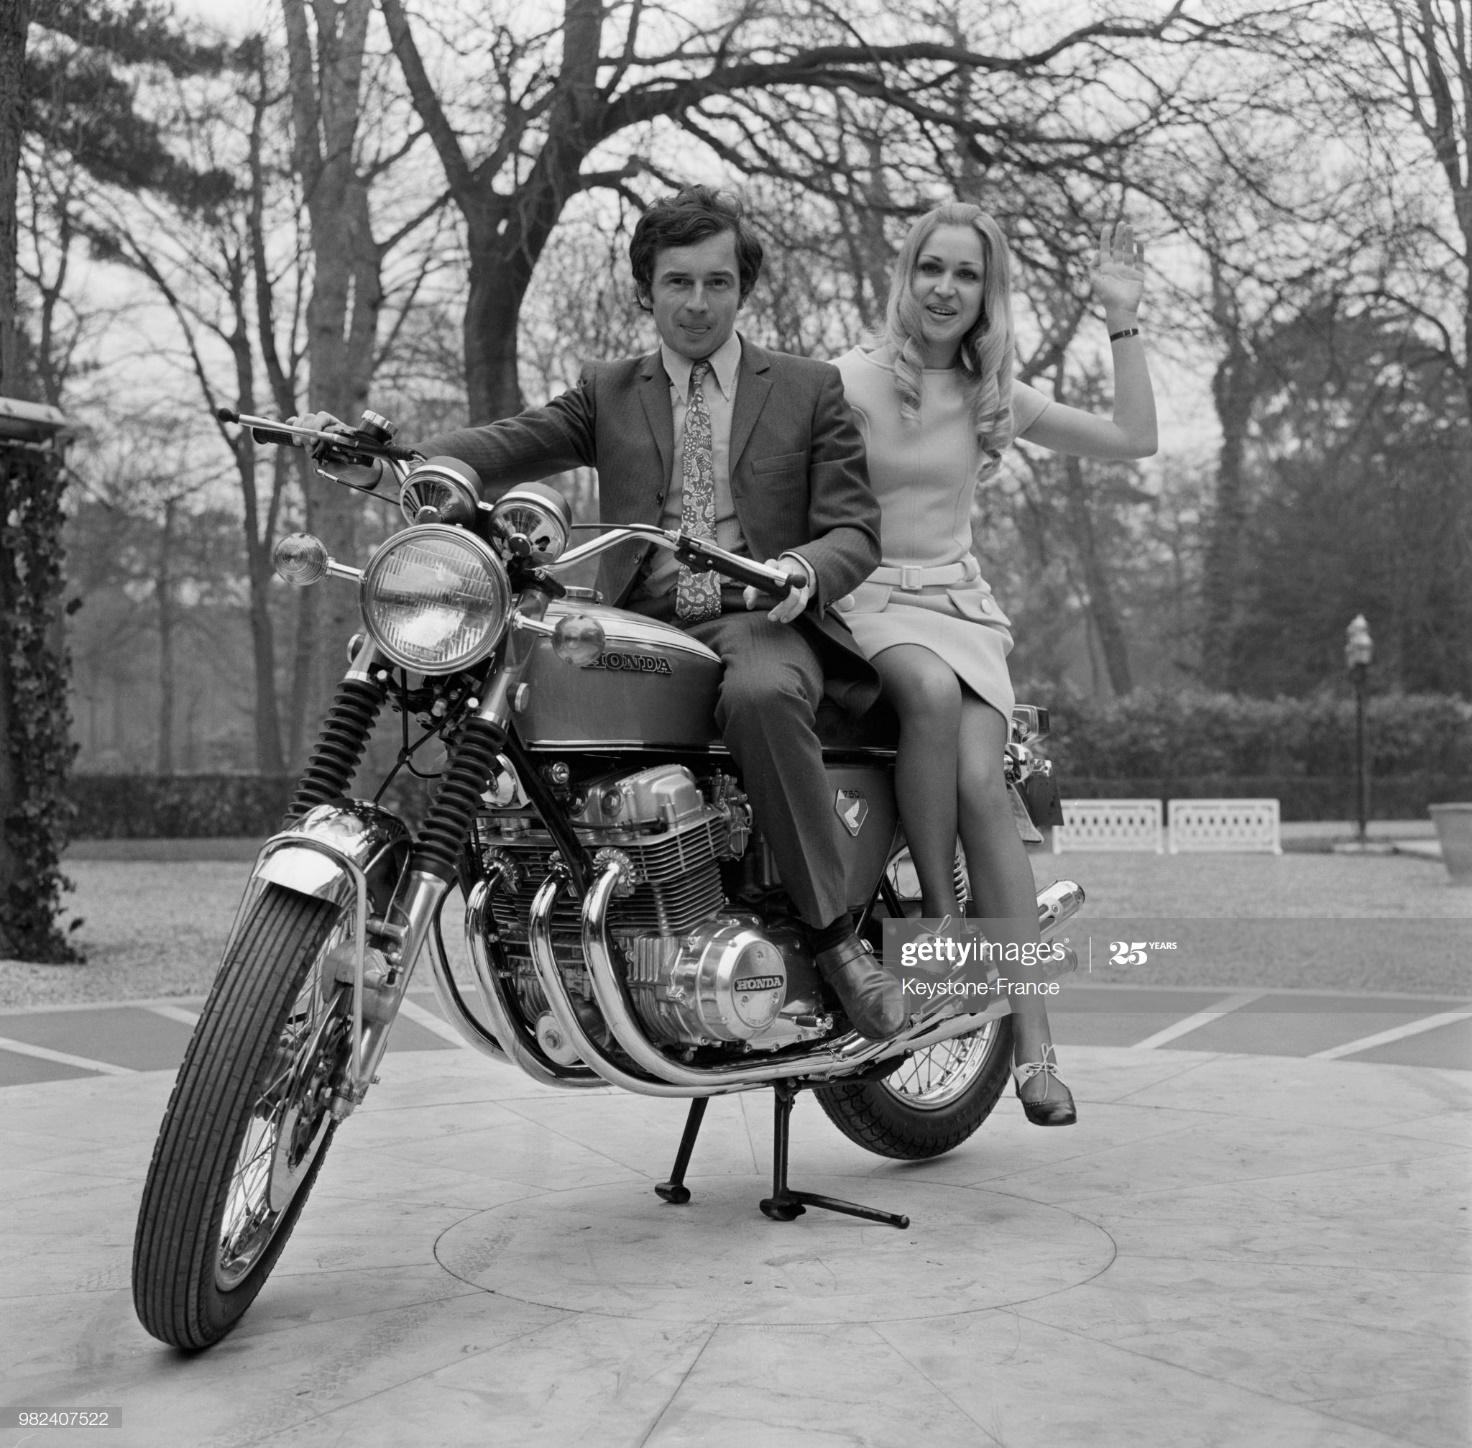 Jean Pierre on a bike with a girl.